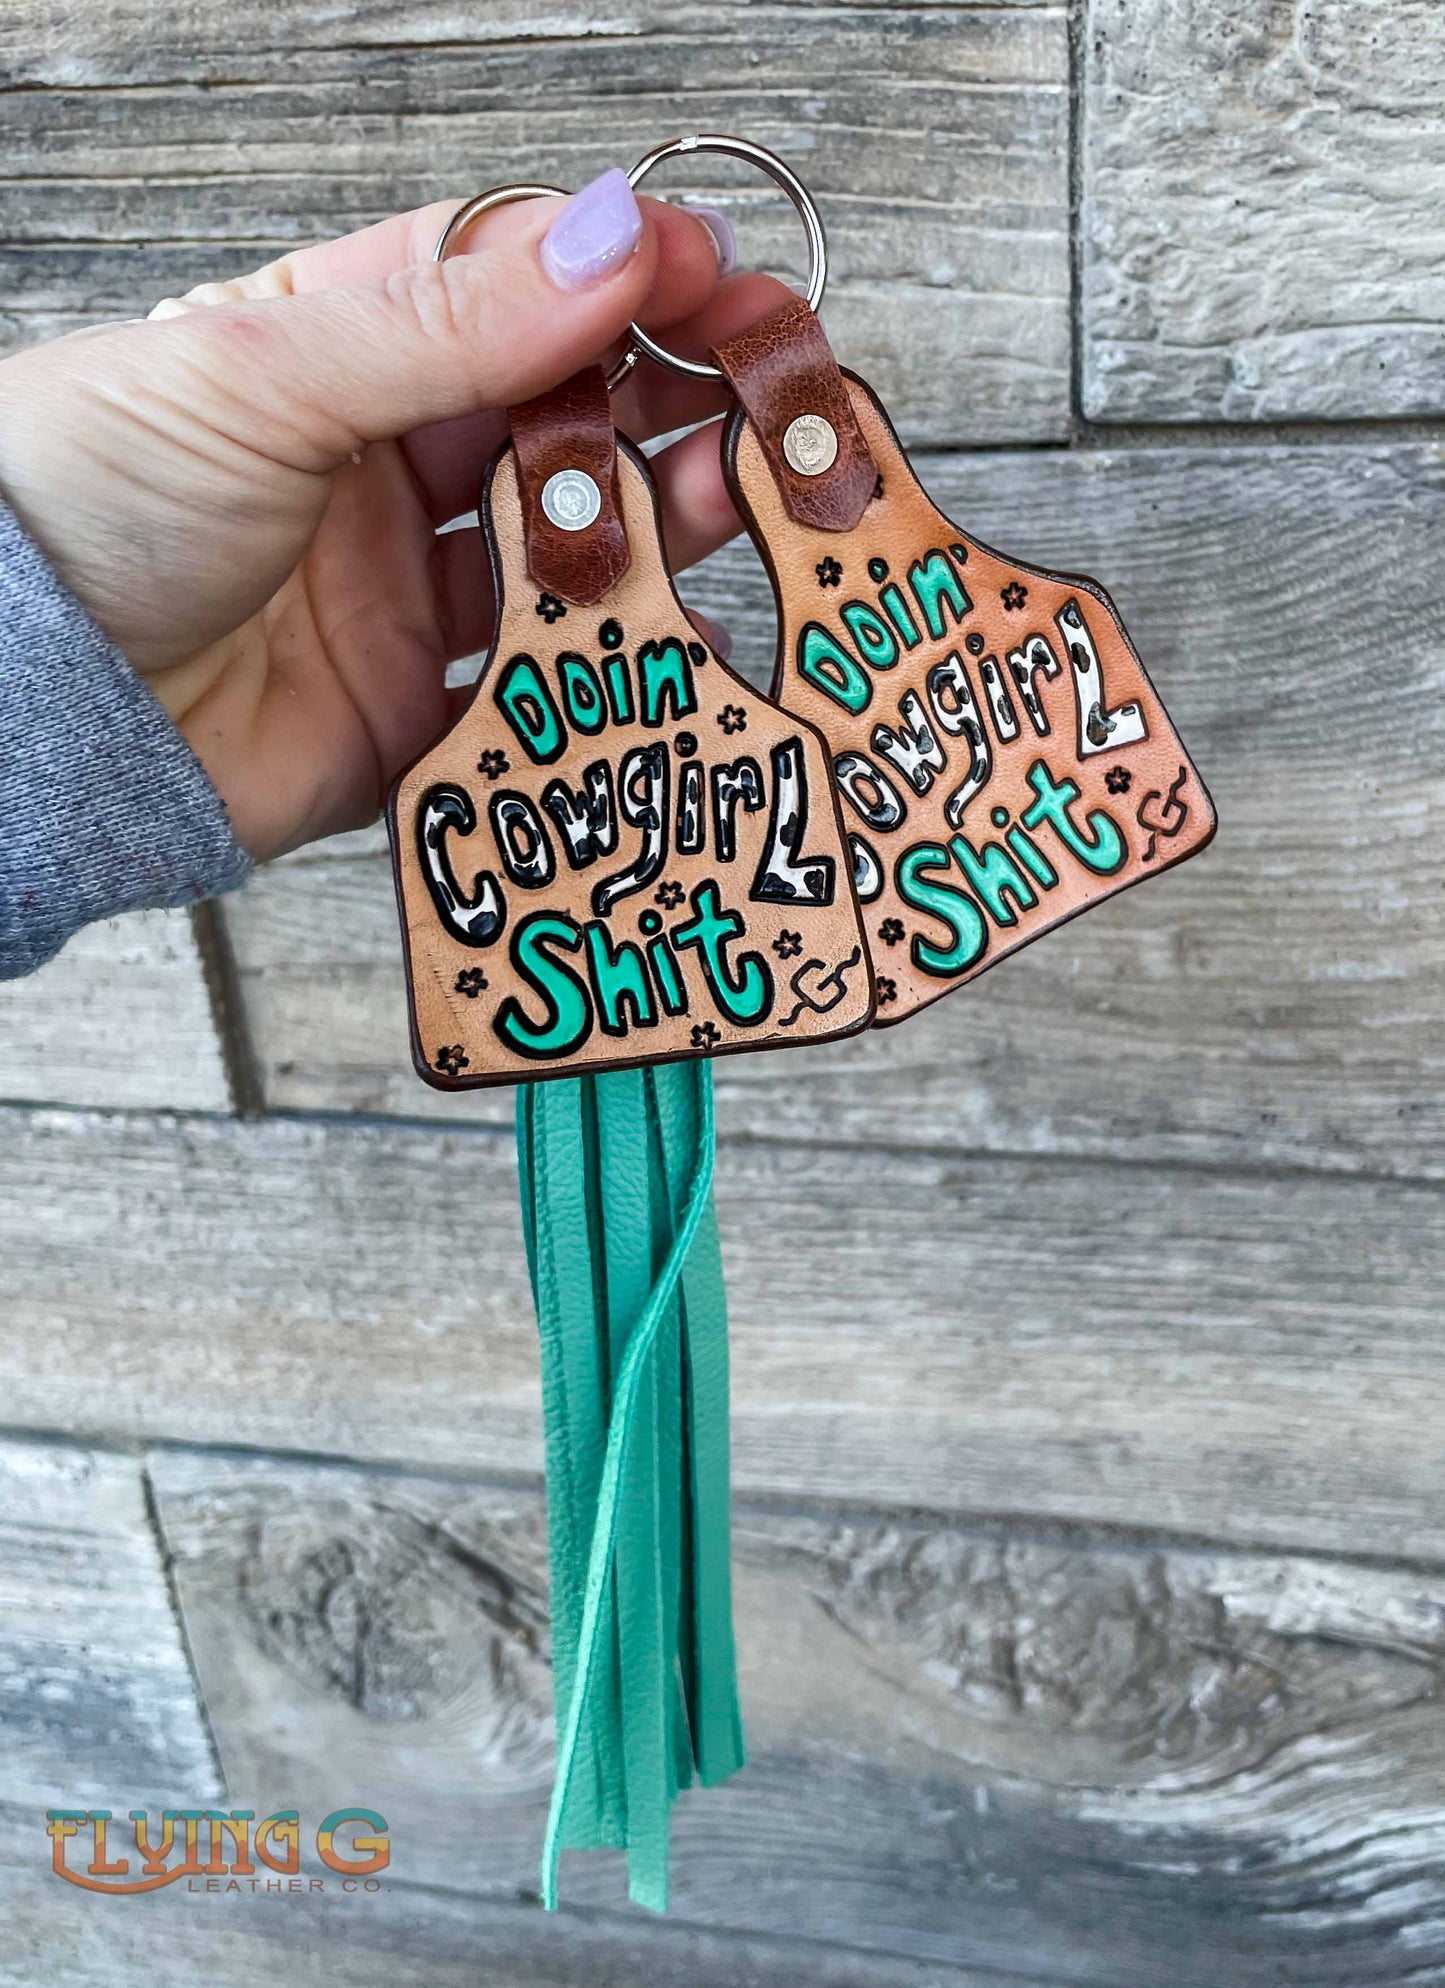 Cowgirl Sh*t Keychain - MADE TO ORDER (approx. 4 week turnaround)